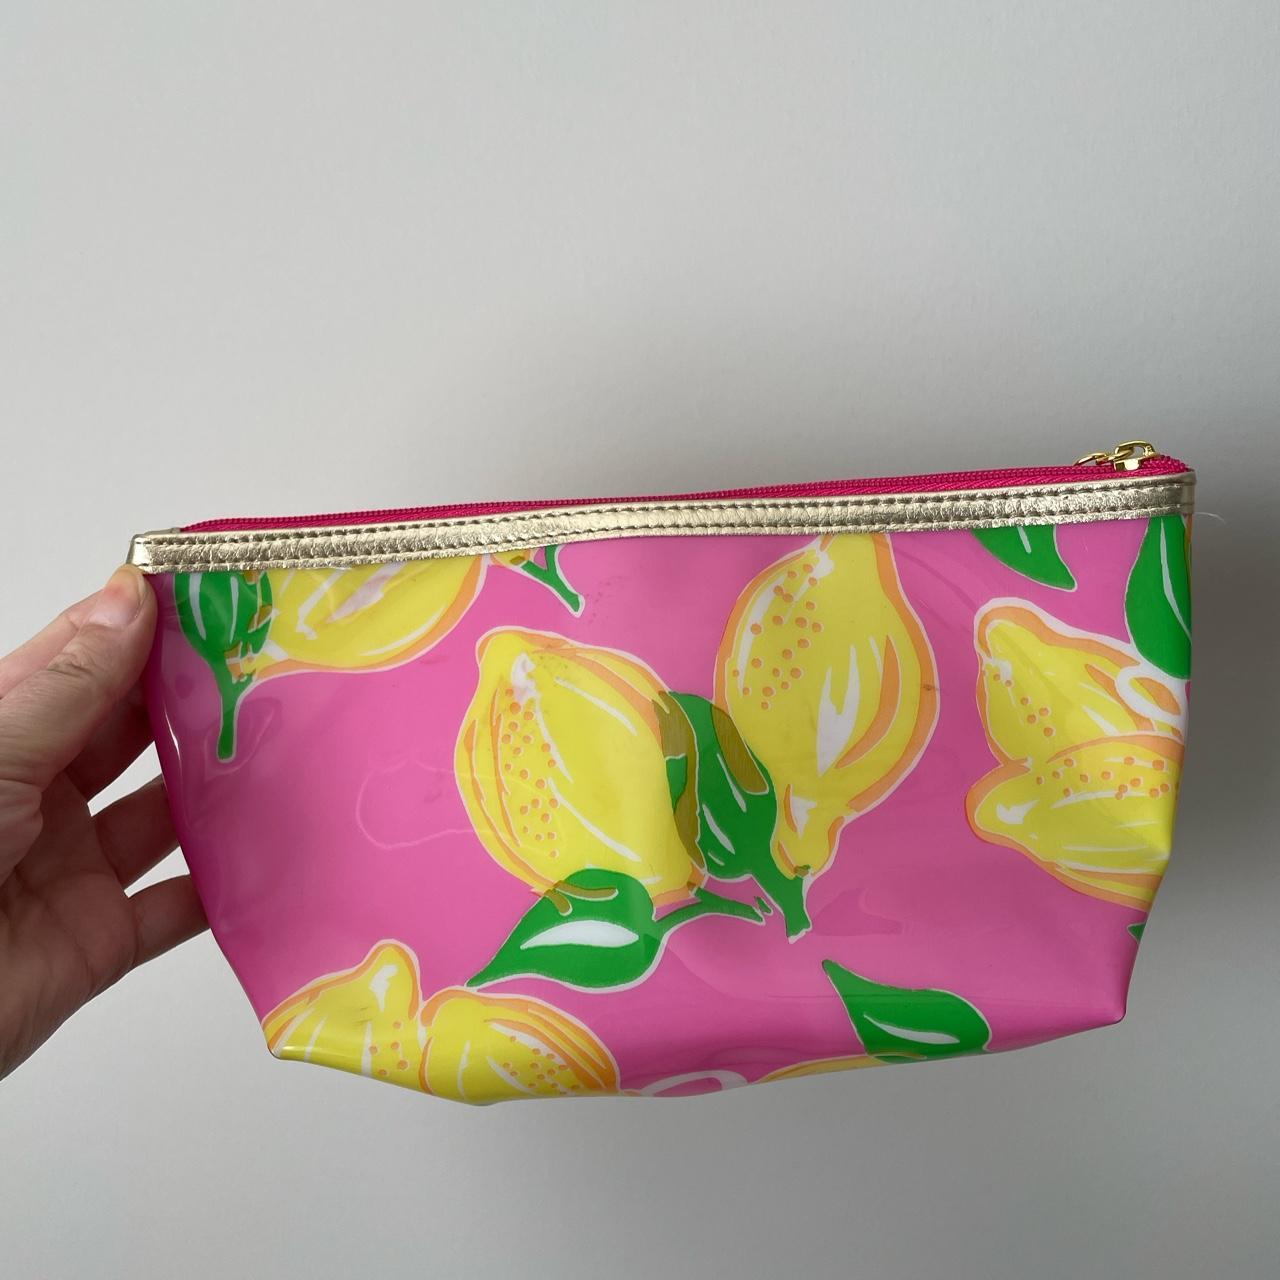 Lilly Pulitzer Women's Pink and Yellow Bag (3)